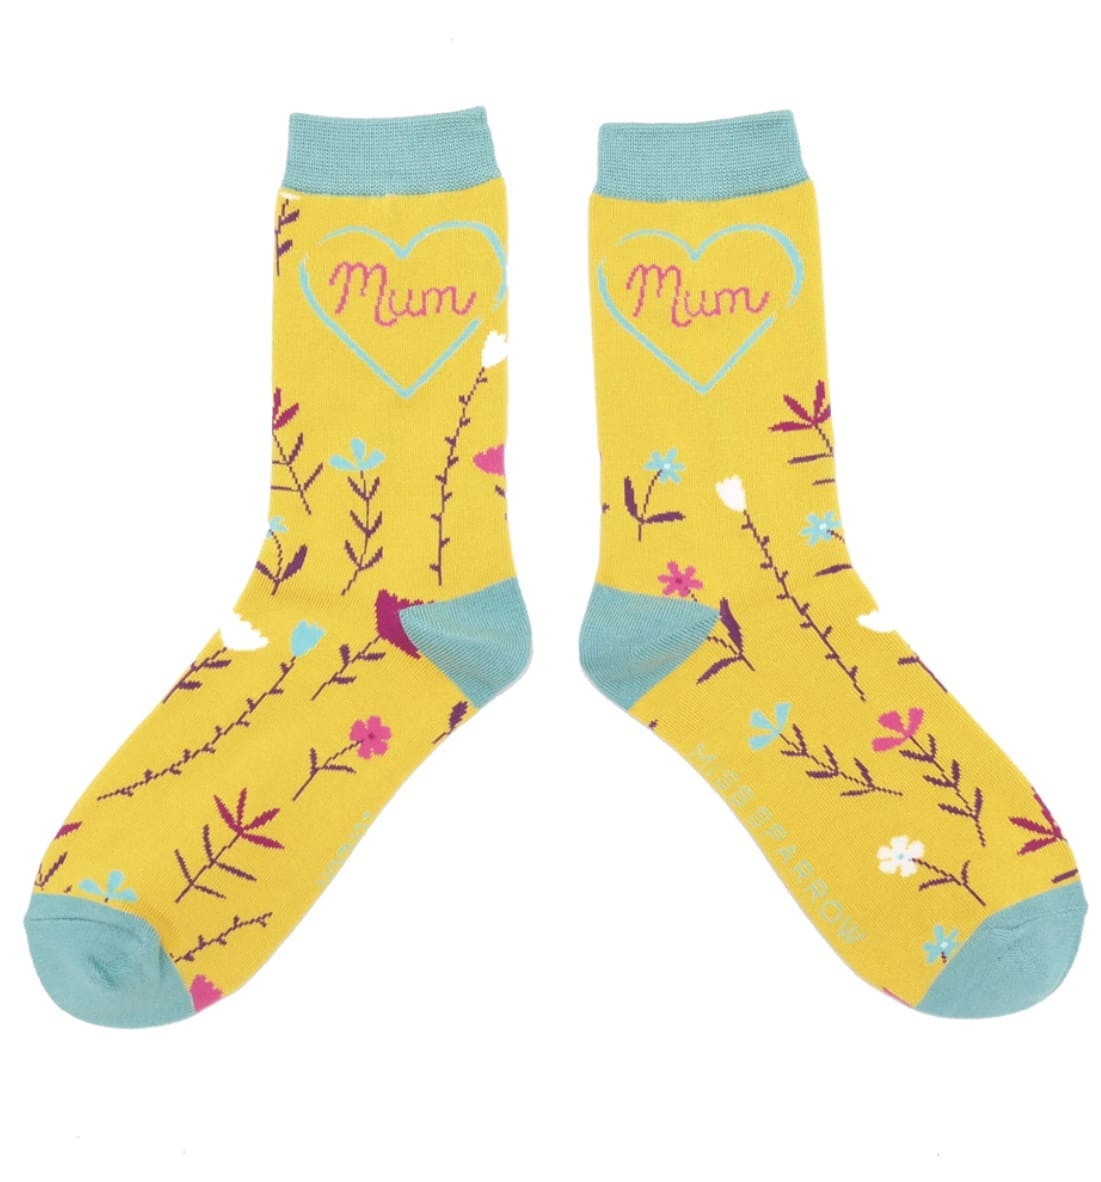 A pair of yellow socks with the word mom on them.